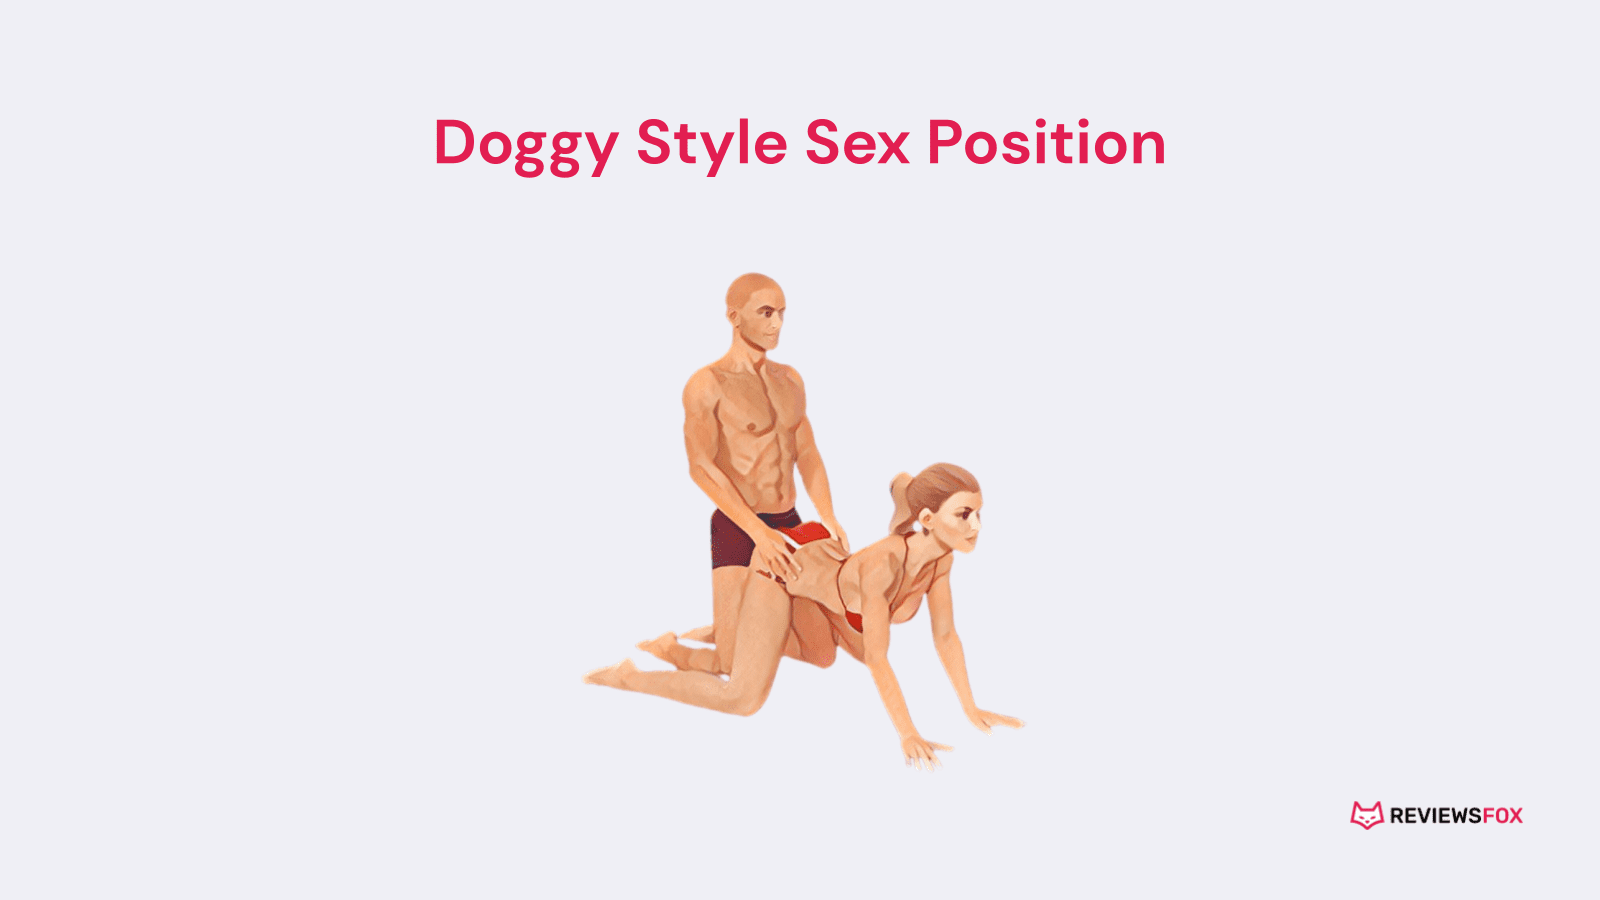 Doggy Style sex position